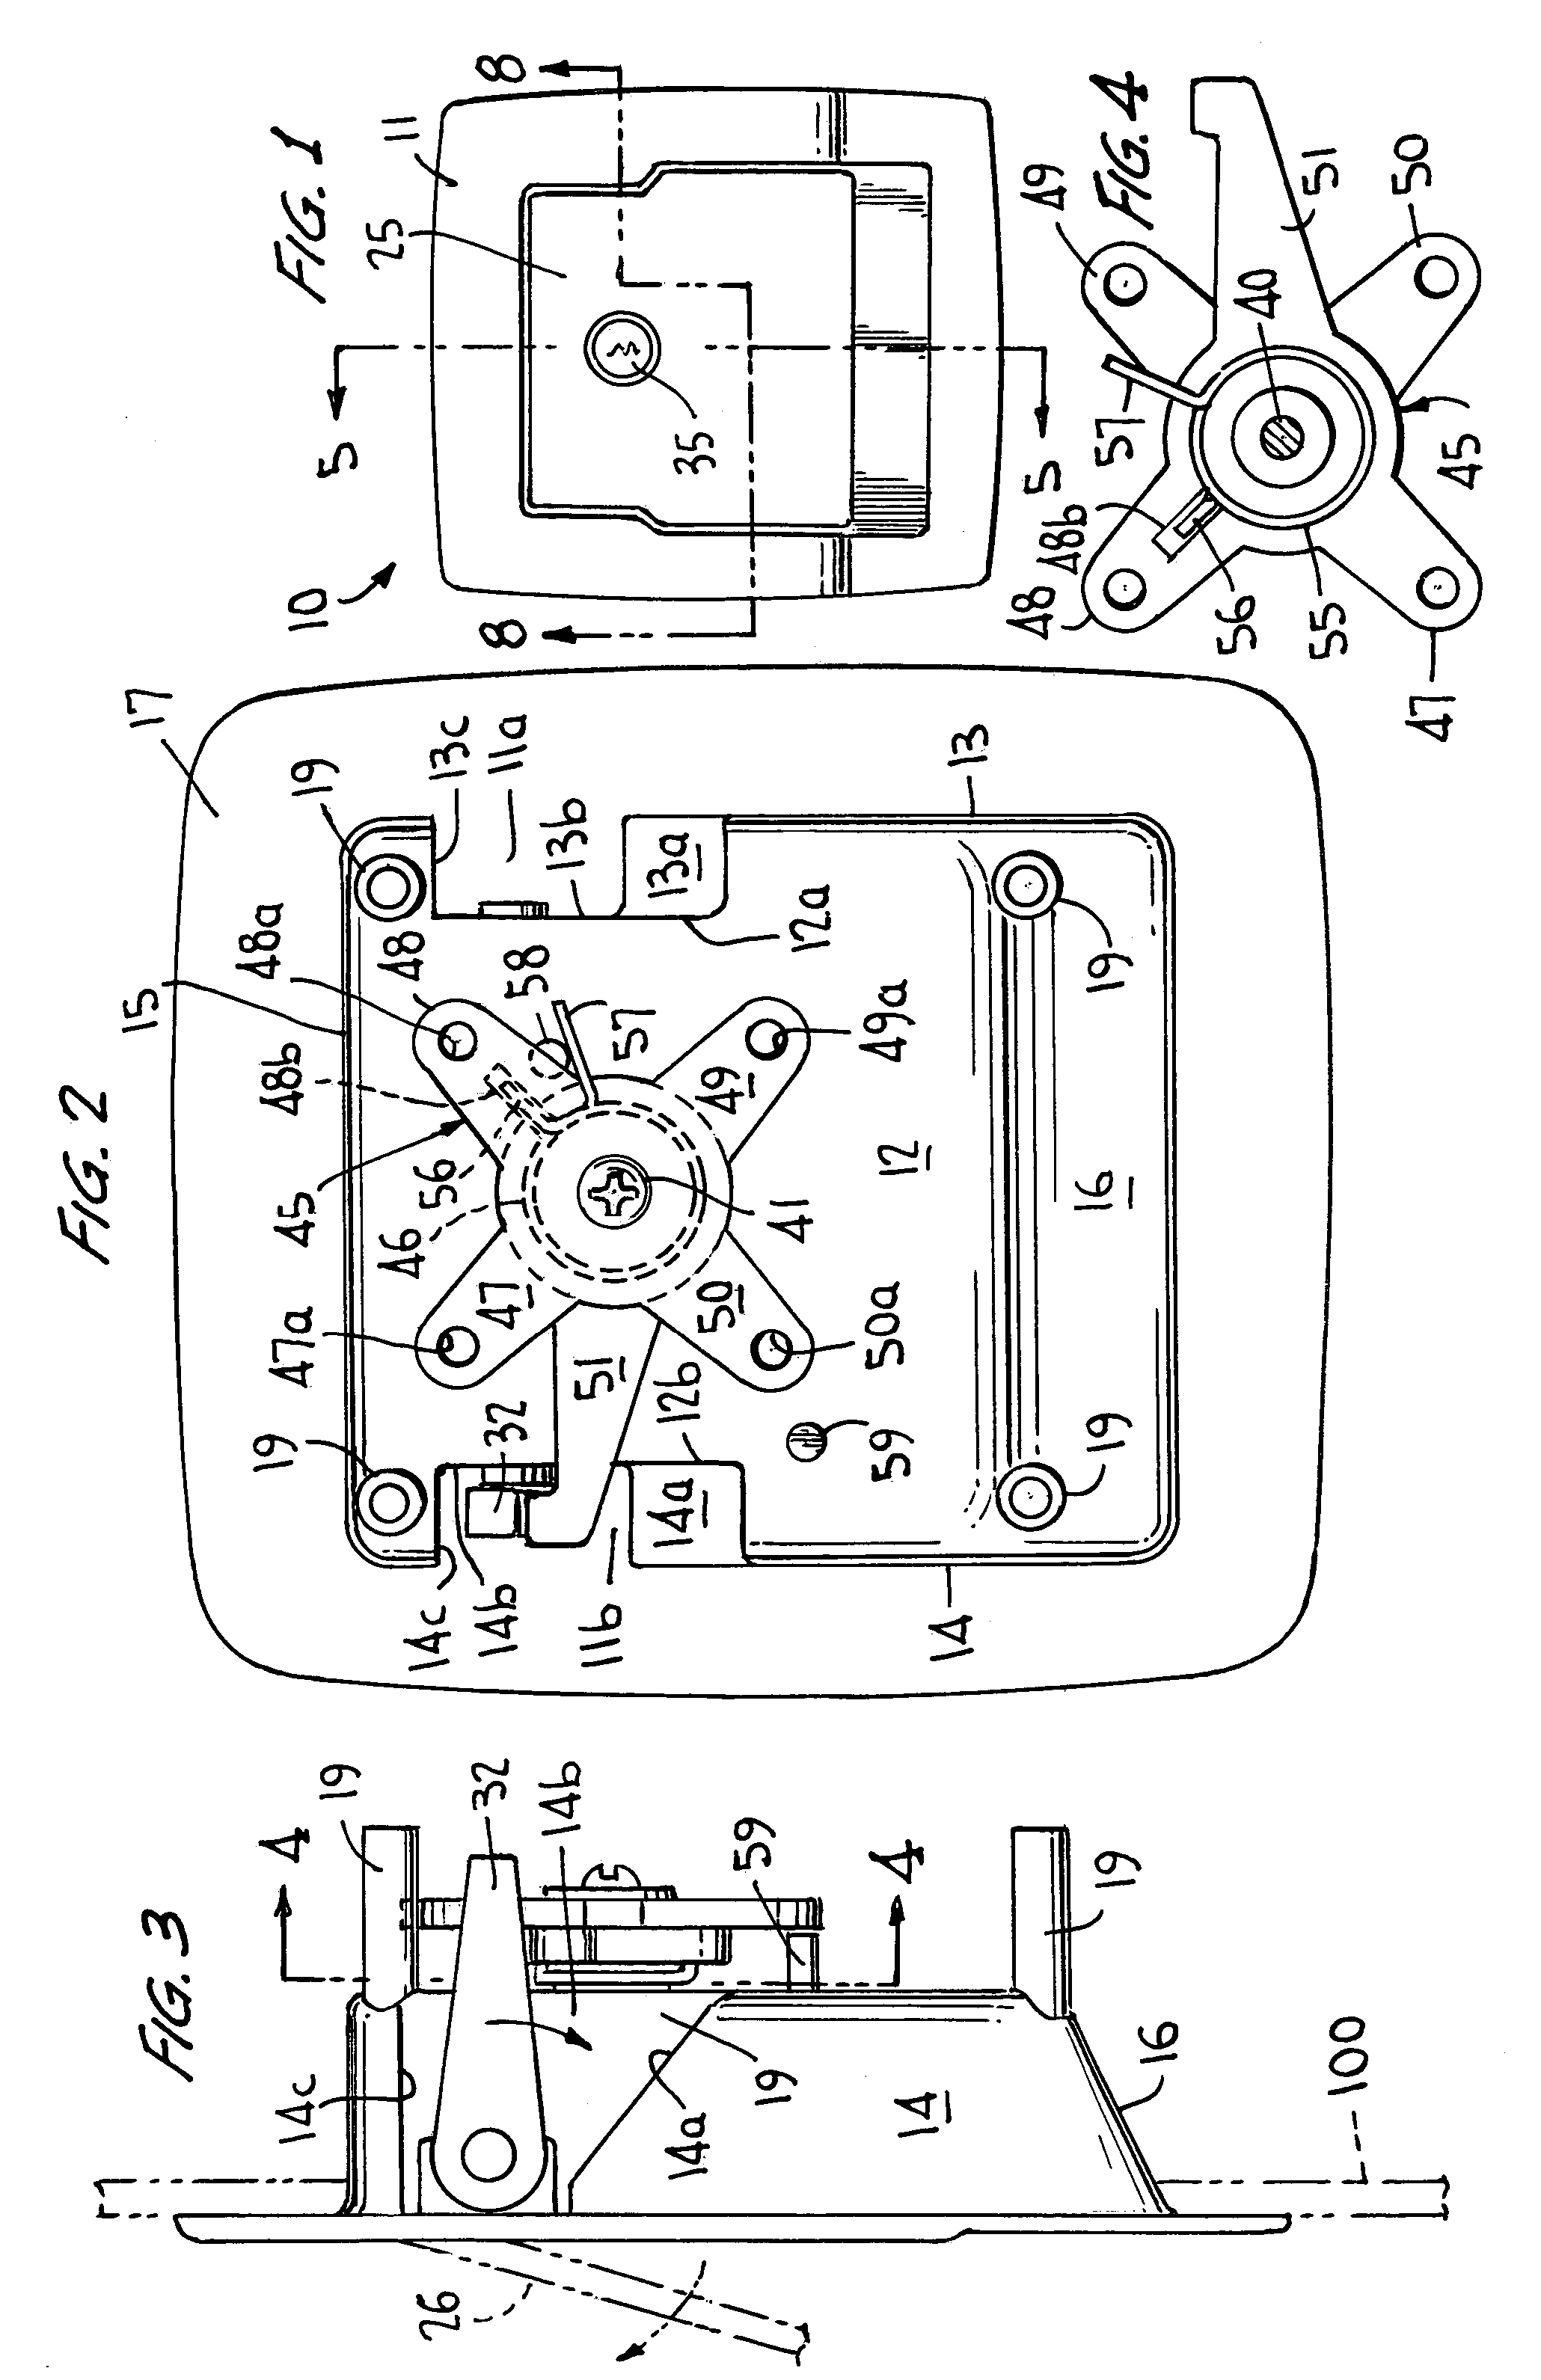 Paddle handle latch release device and spring latch system using same